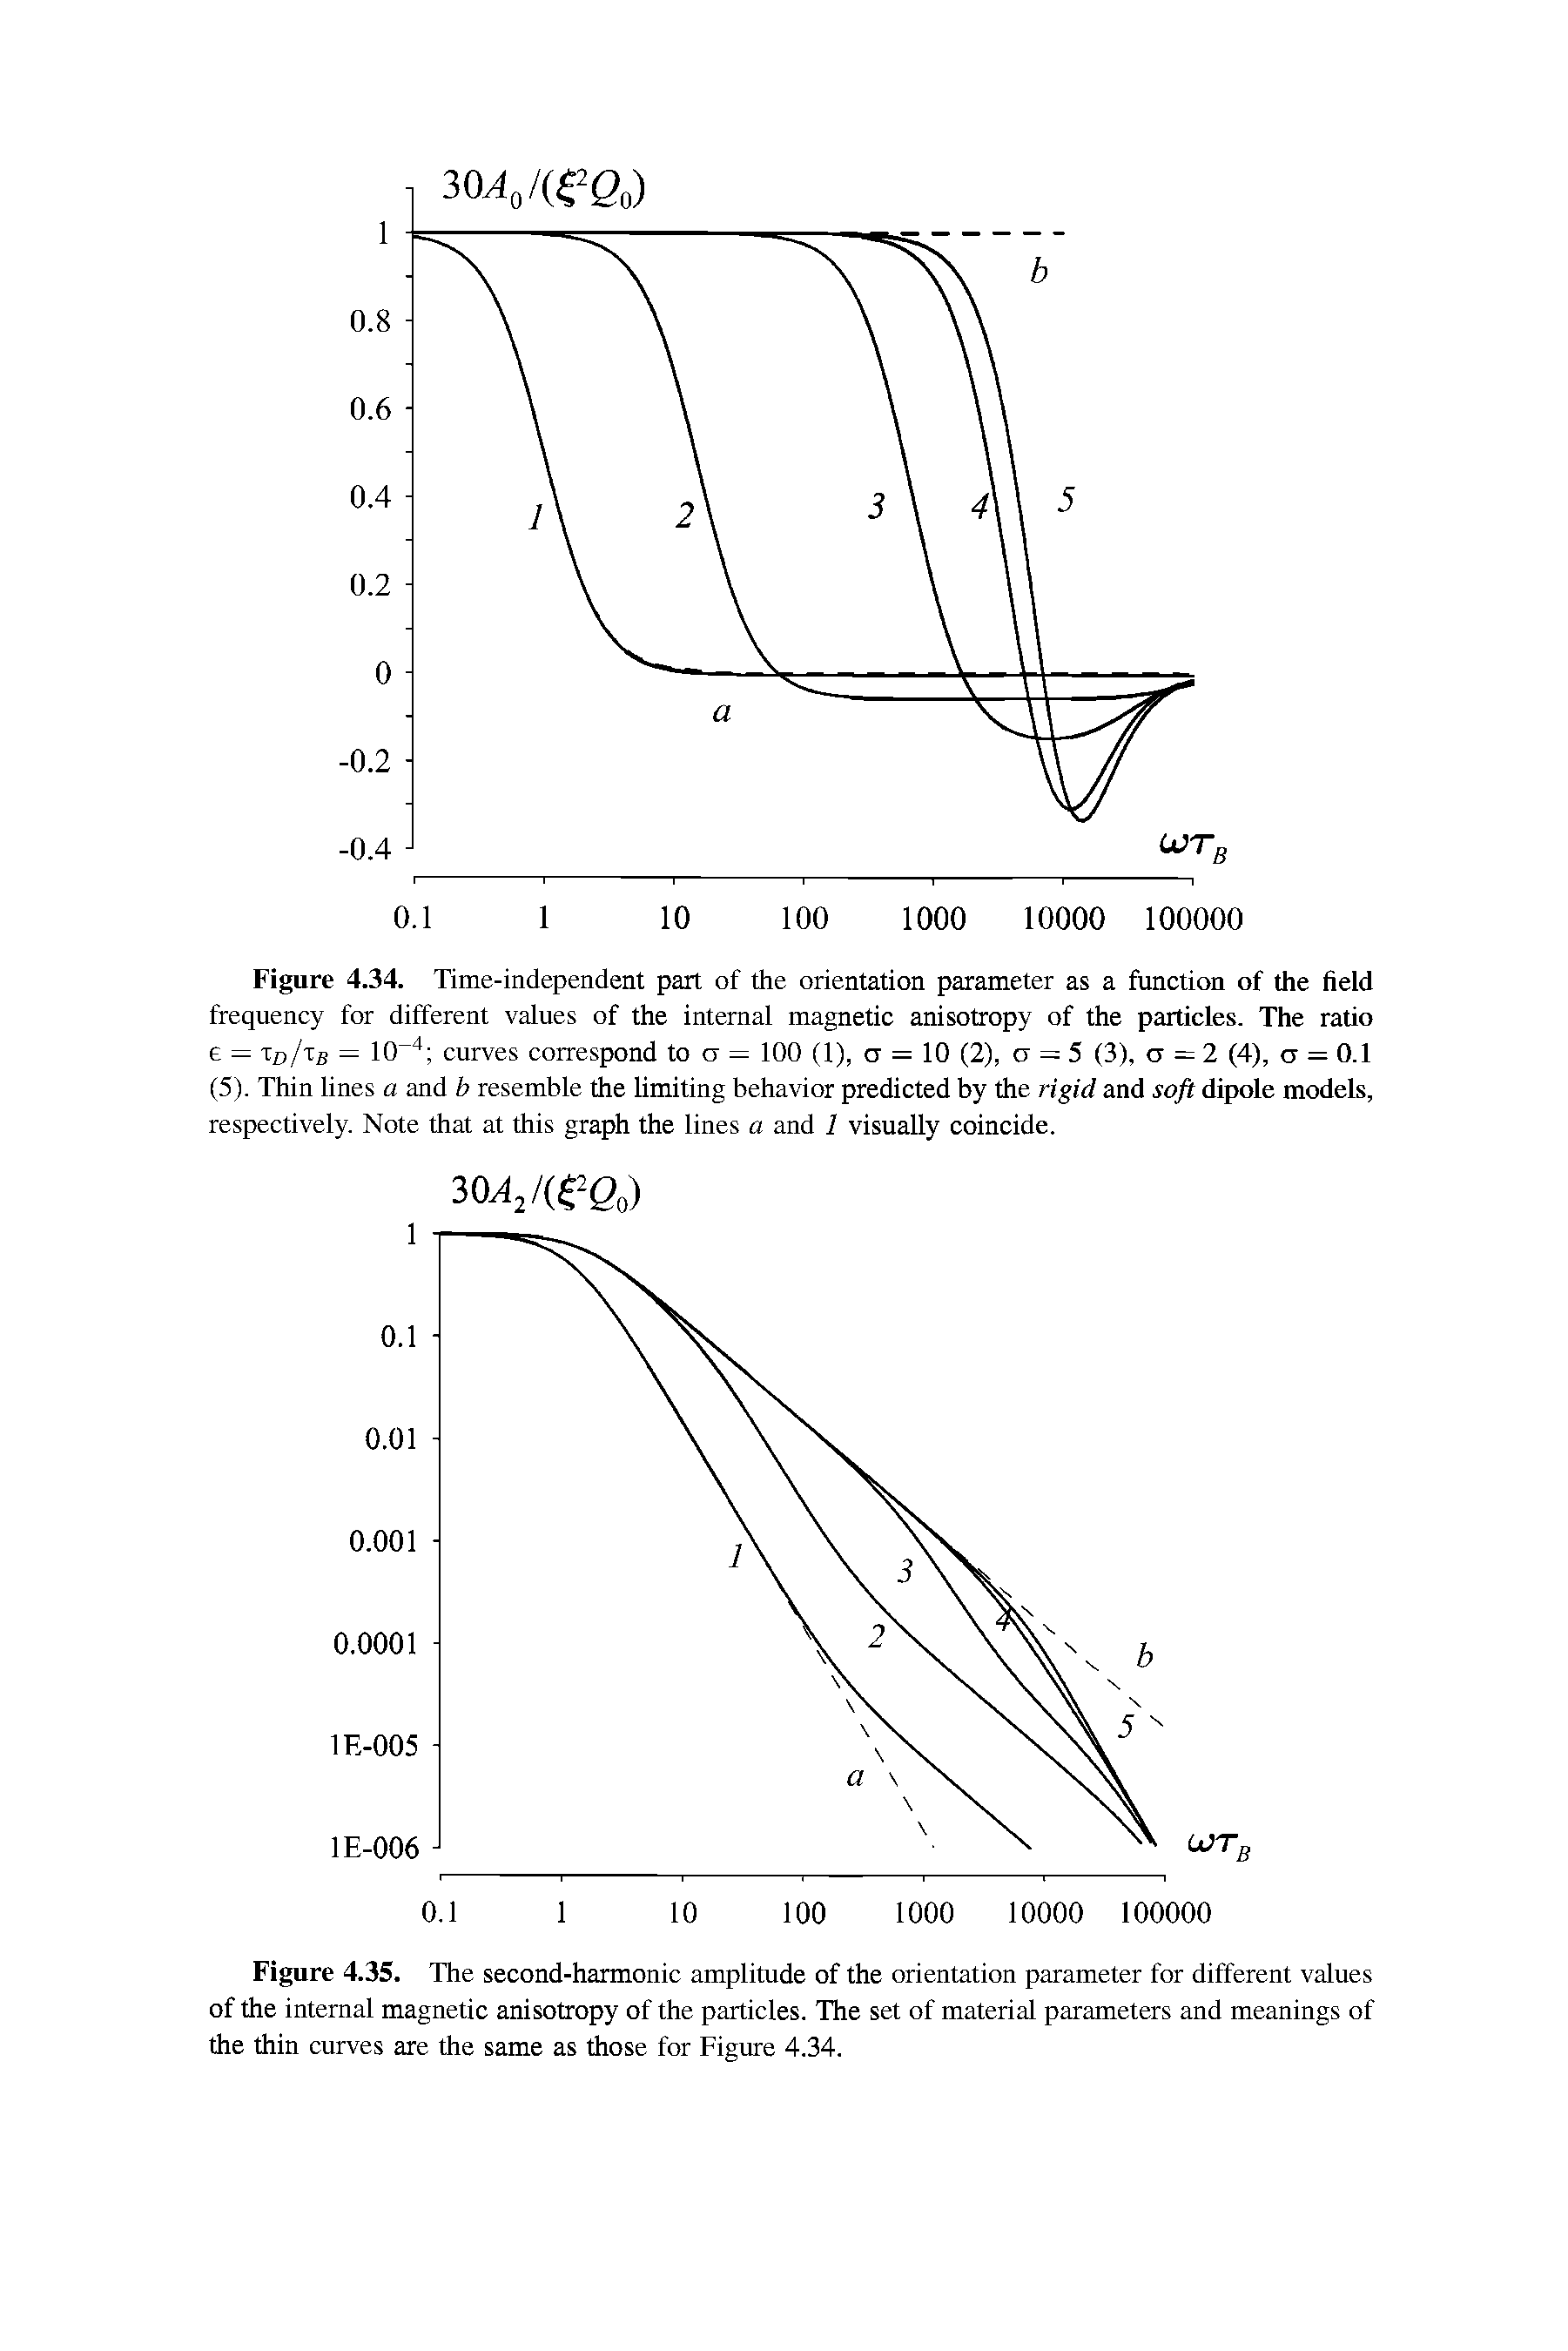 Figure 4.34. Time-independent part of the orientation parameter as a function of the field frequency for different values of the internal magnetic anisotropy of the particles. The ratio e = TdAb = 1CT4 curves correspond to a = 100 (1), a = 10 (2), o = 5 (3), a = 2 (4), a = 0.1 (5). Thin lines a and b resemble the limiting behavior predicted by the rigid and soft dipole models, respectively. Note that at this graph the lines a and 1 visually coincide.